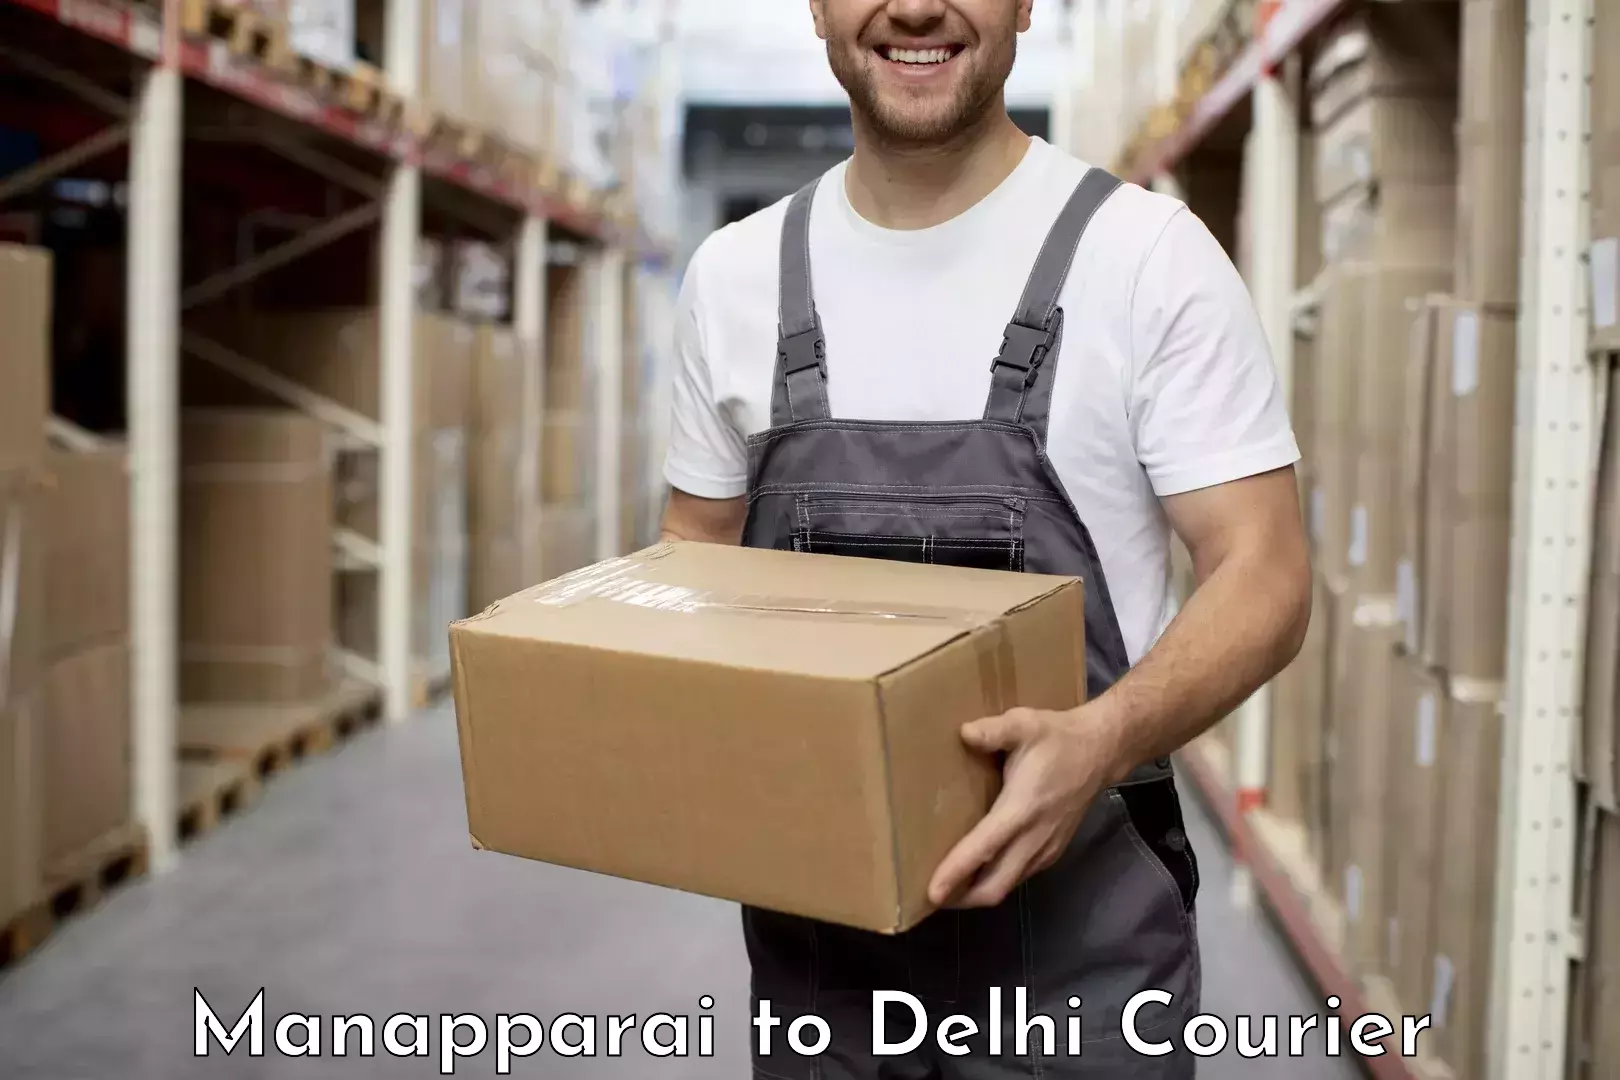 Professional courier handling Manapparai to East Delhi